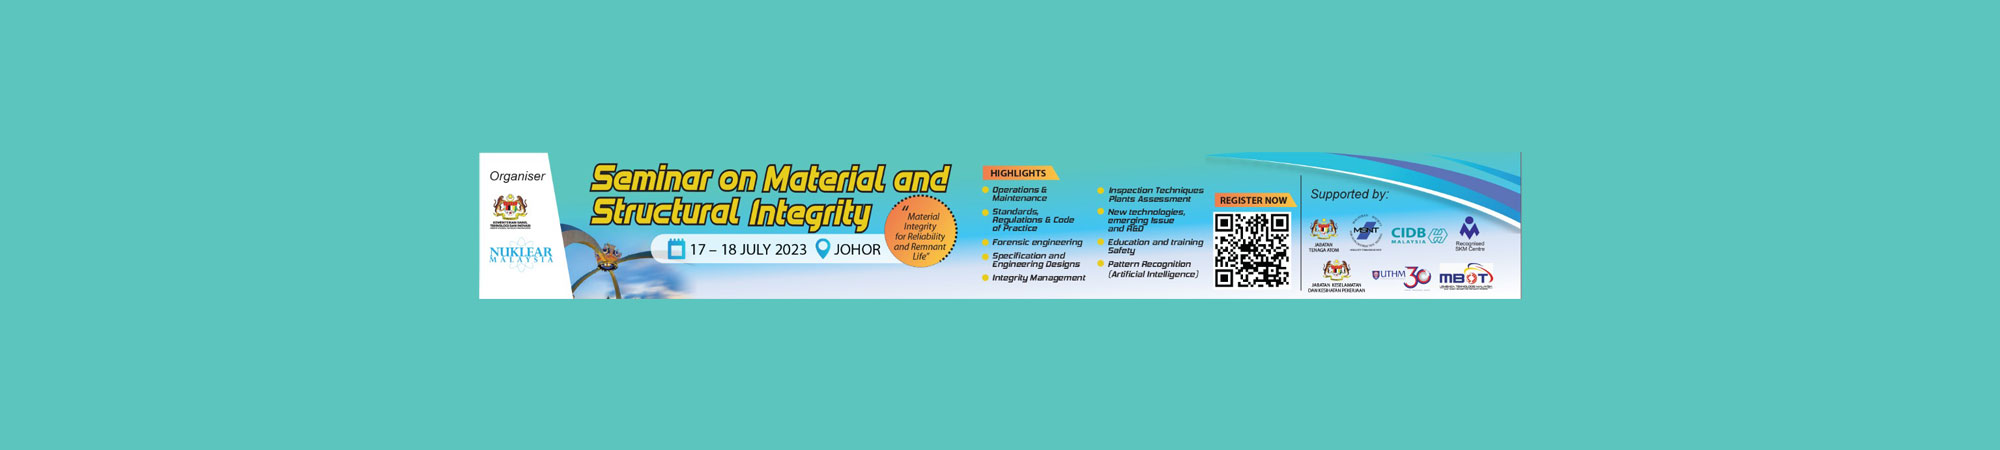 banner-seminar-material-structural-integrity